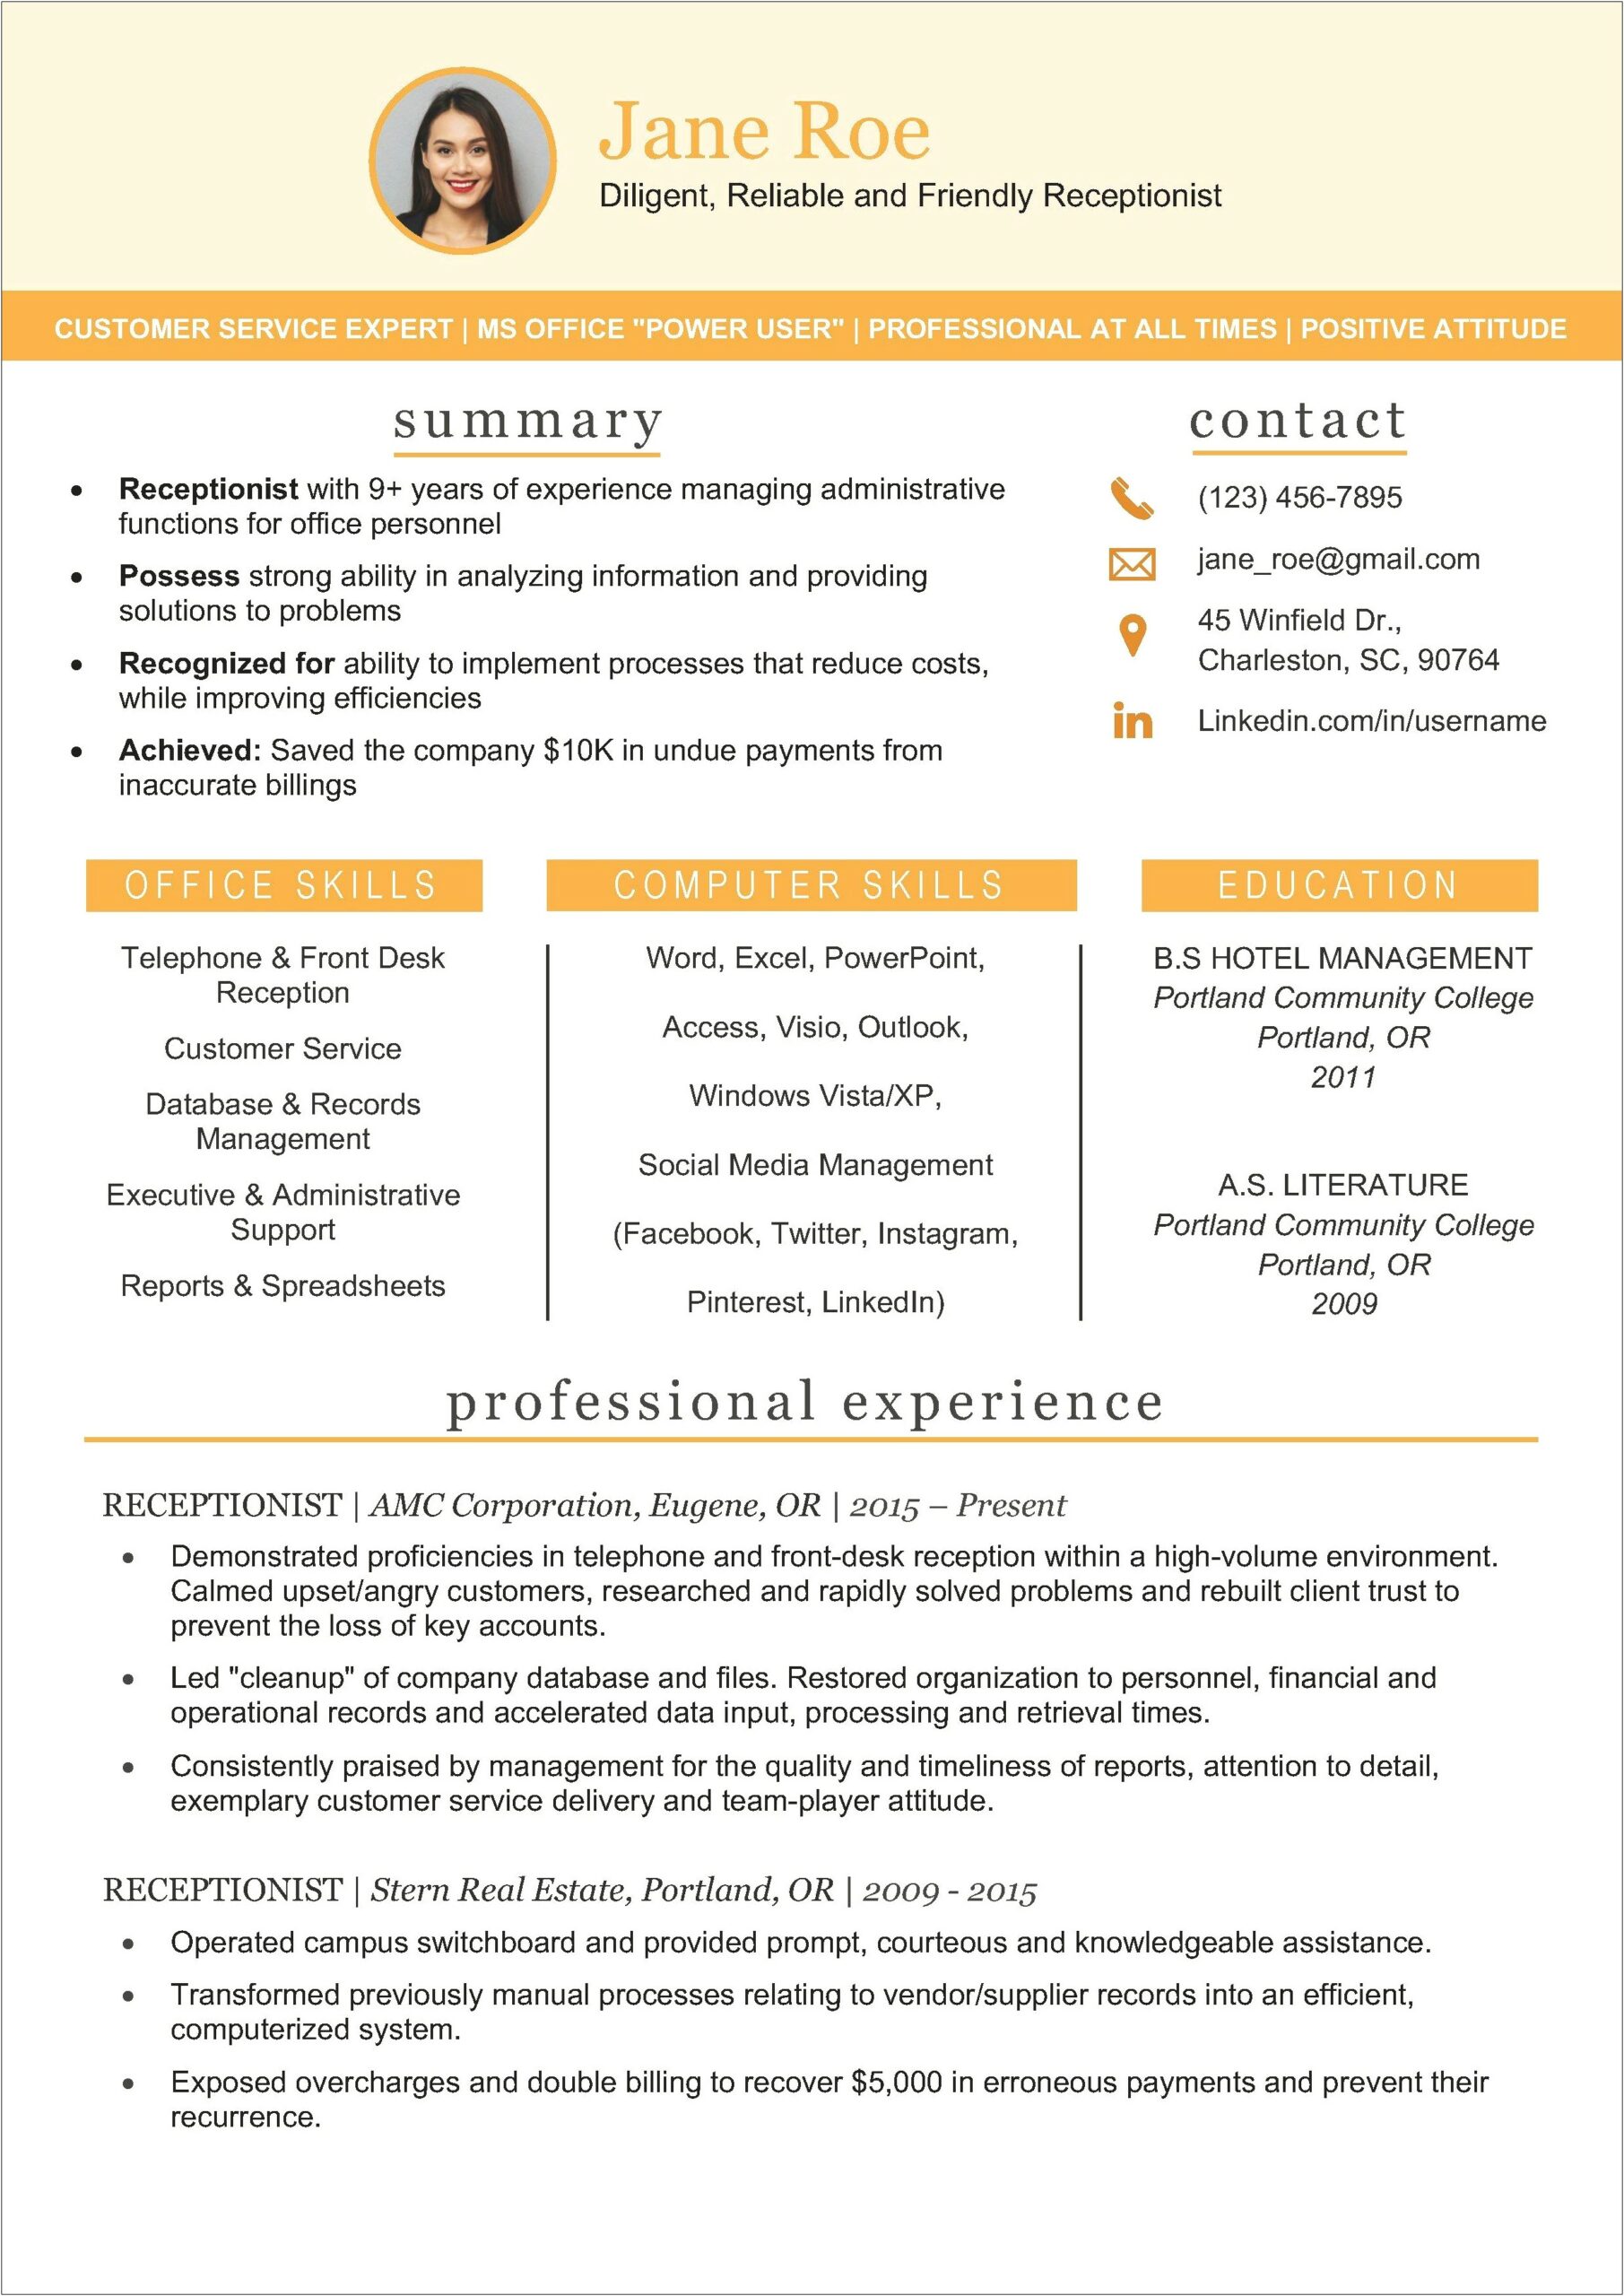 Skills For A Resume As A Receptionist